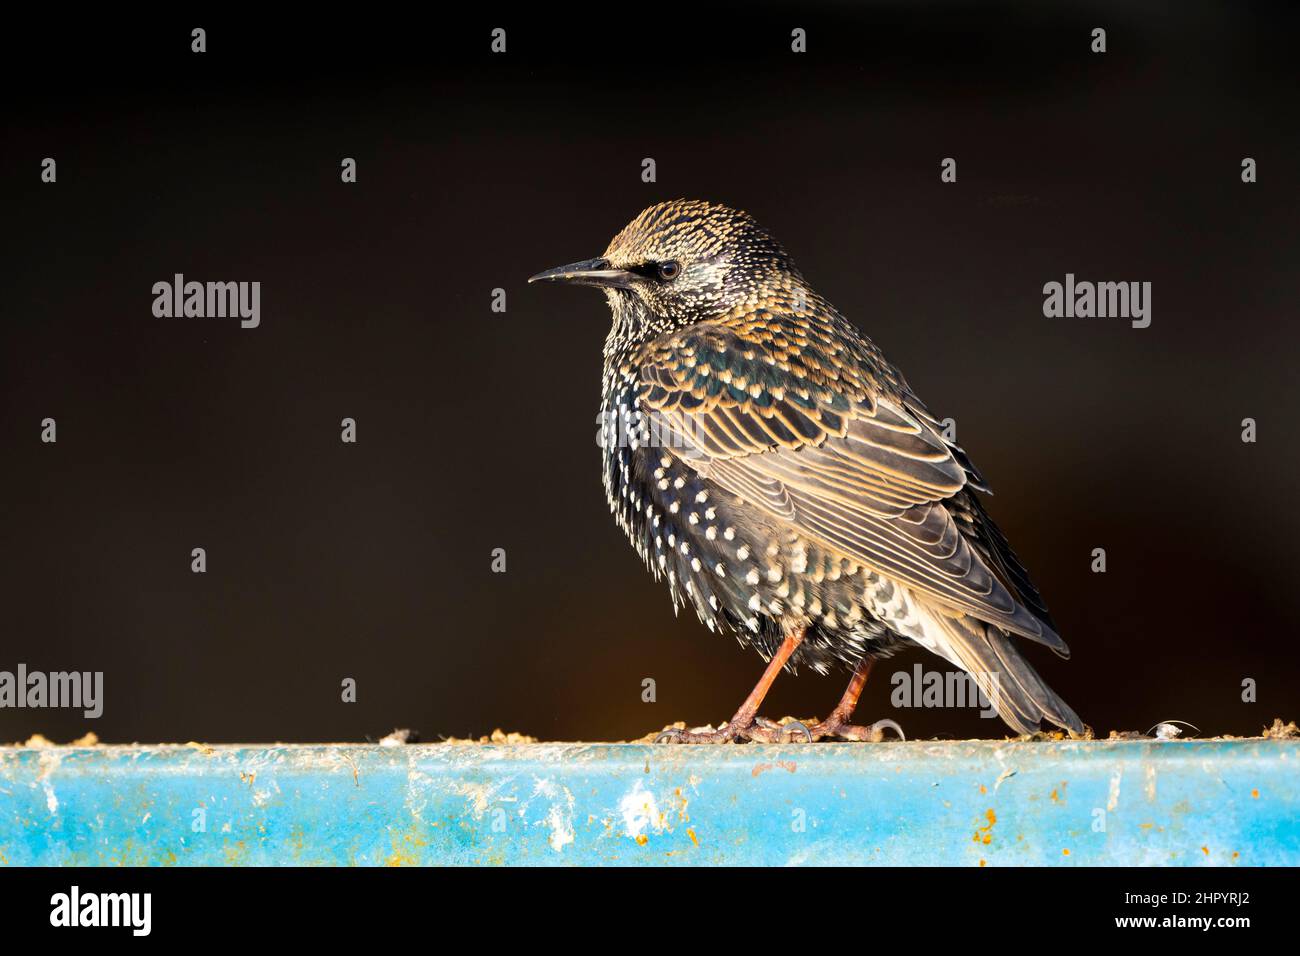 Starling (Sturnus vulgaris) perched on a blue fence, England Stock Photo